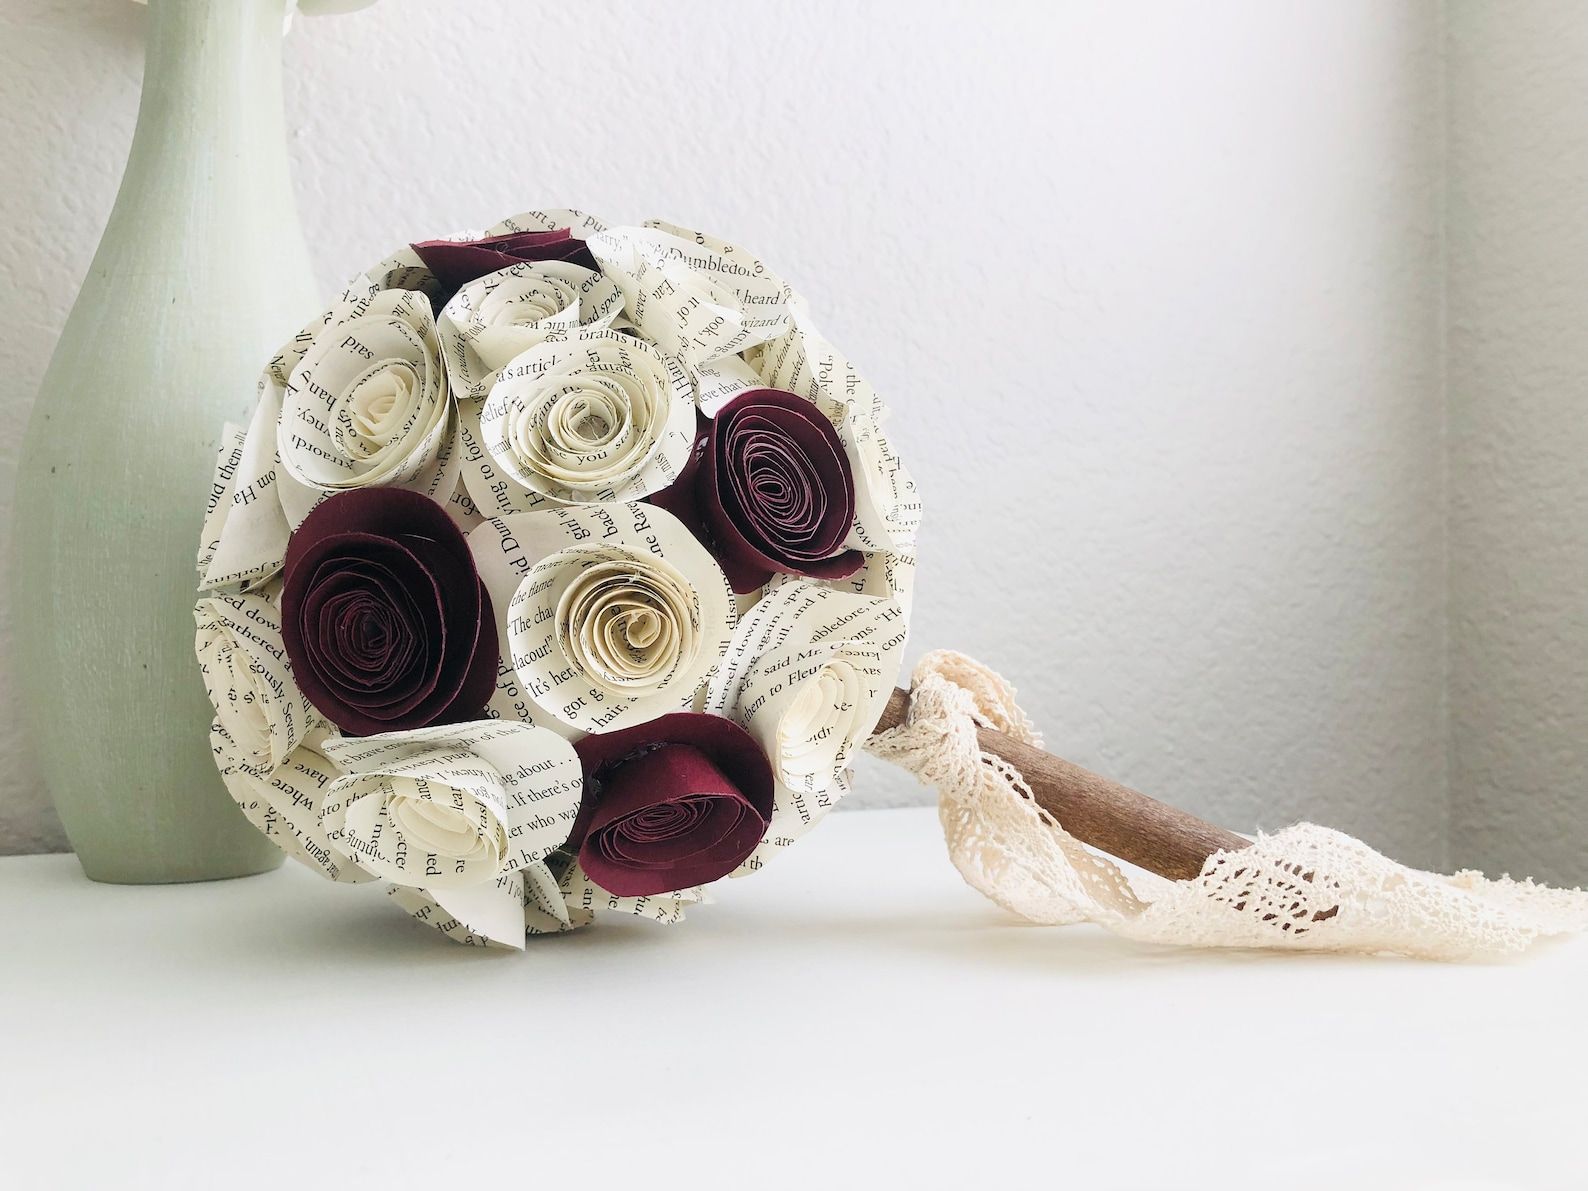 A bouquet of roses made out of book pages.